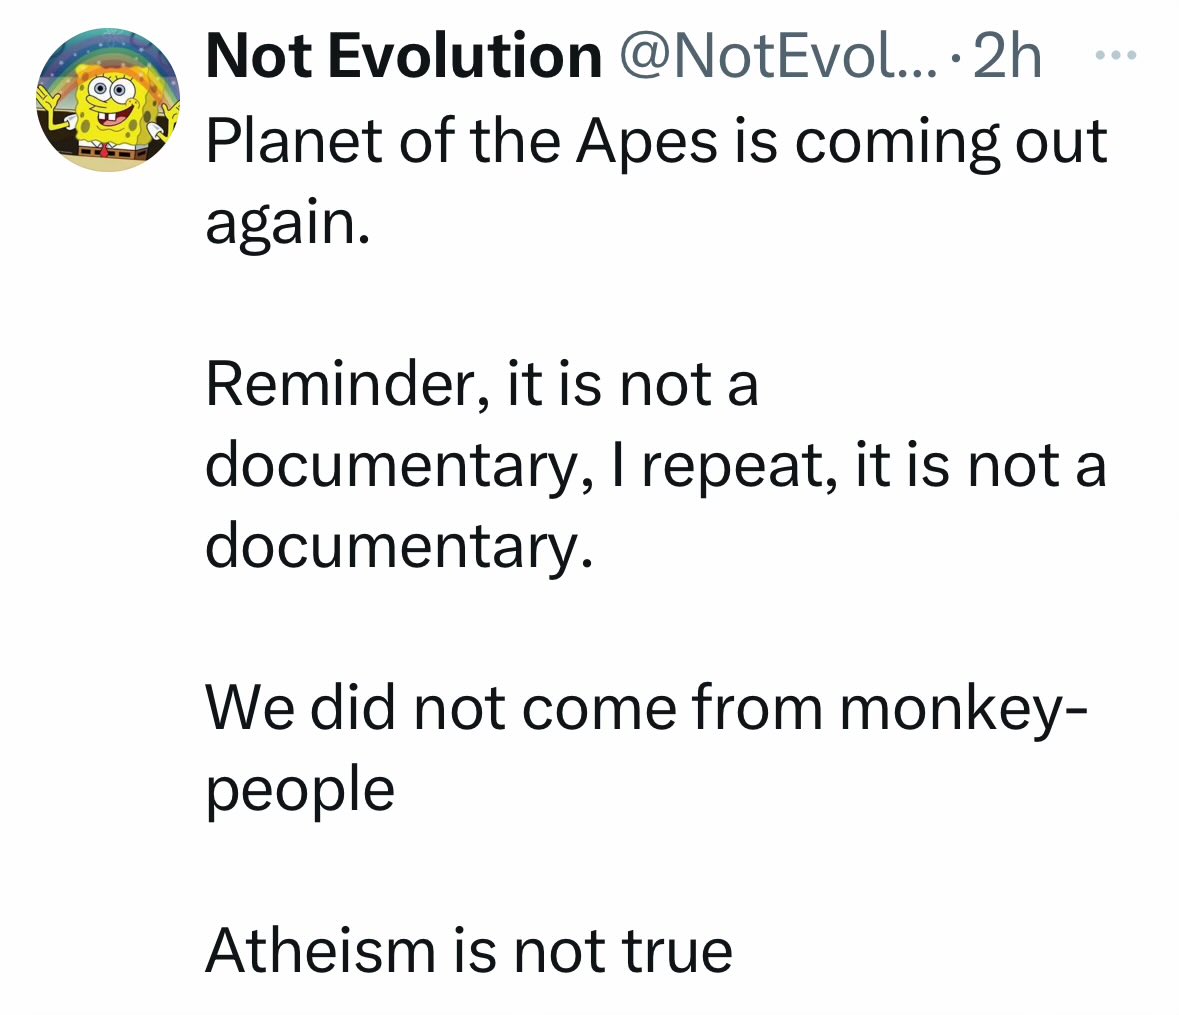 Tell us you know nothing about atheism or evolution without telling us 🤦‍♂️